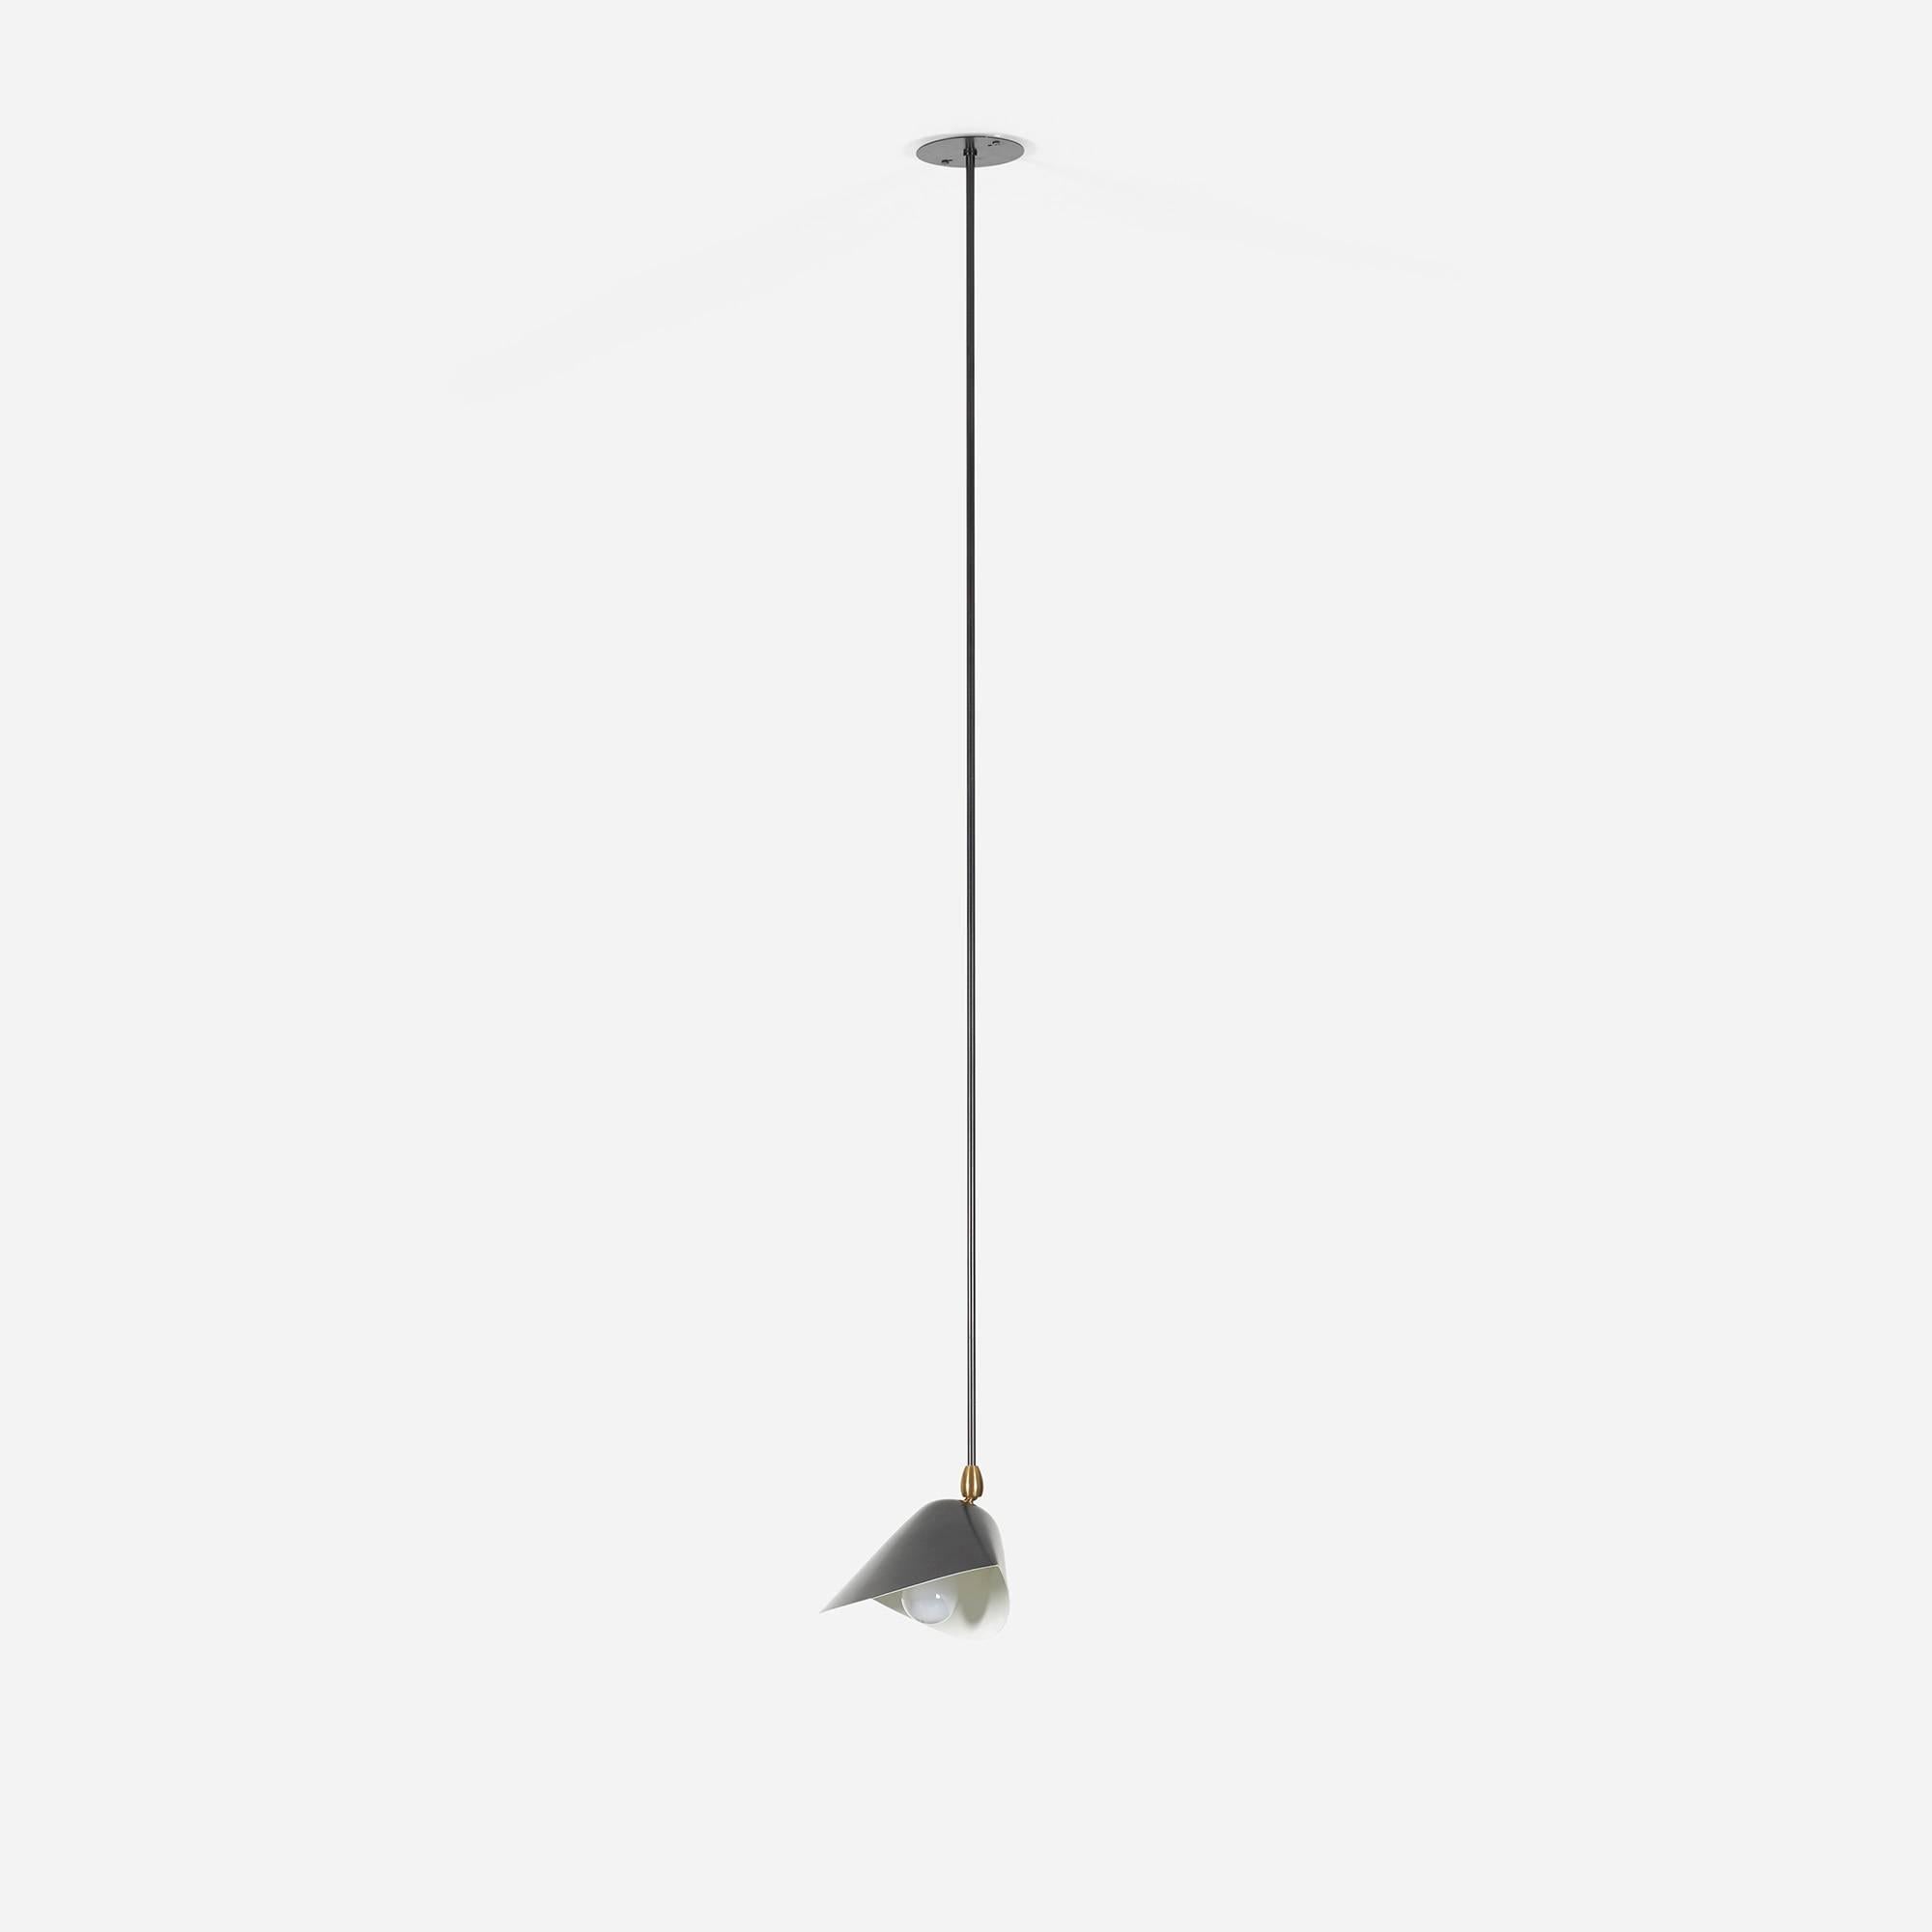 Dynamic alone or in groups, these Library Ceiling Lamps by Serge Mouille can be used to highlight art, books or as general illumination. Fifty examples are available, price listed is for one light. Reviewed and recognized by Edition Serge Mouille. 